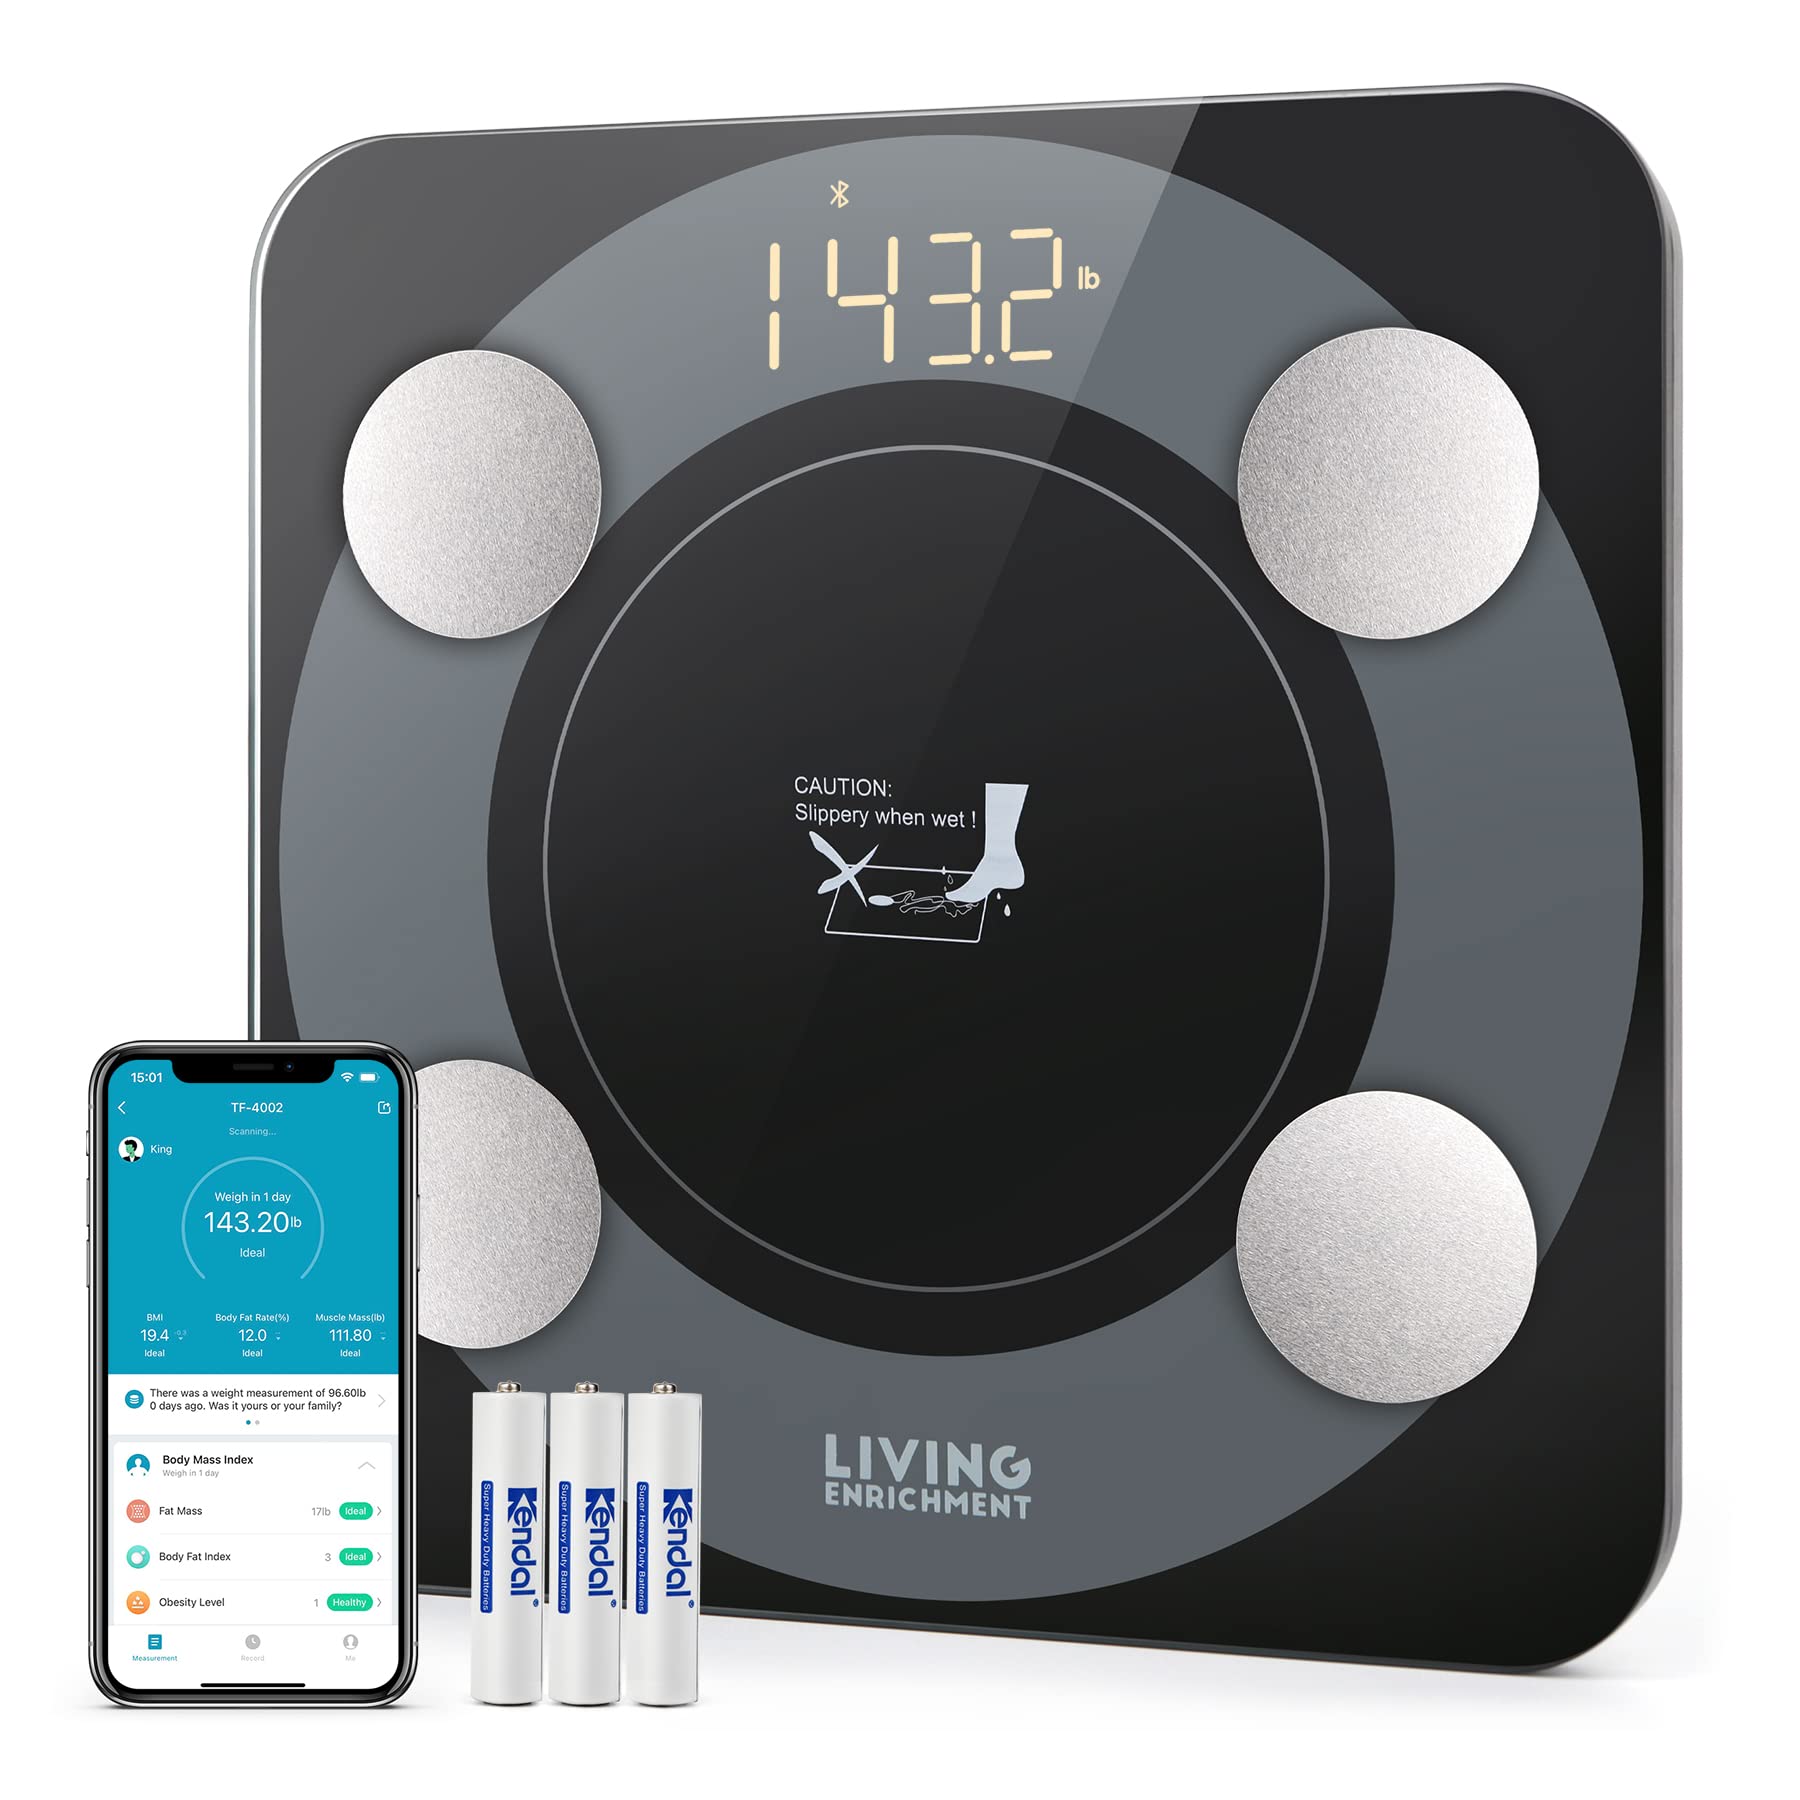 Bluetooth Scale for Body Weight, Living Enrichment Smart Body Fat Weight BMI Bathroom Wireless Scale with High Accuracy Sensor, Body Composition Monitor Analyzer with Smartphone App, 396 lbs - Black 4002 Scale